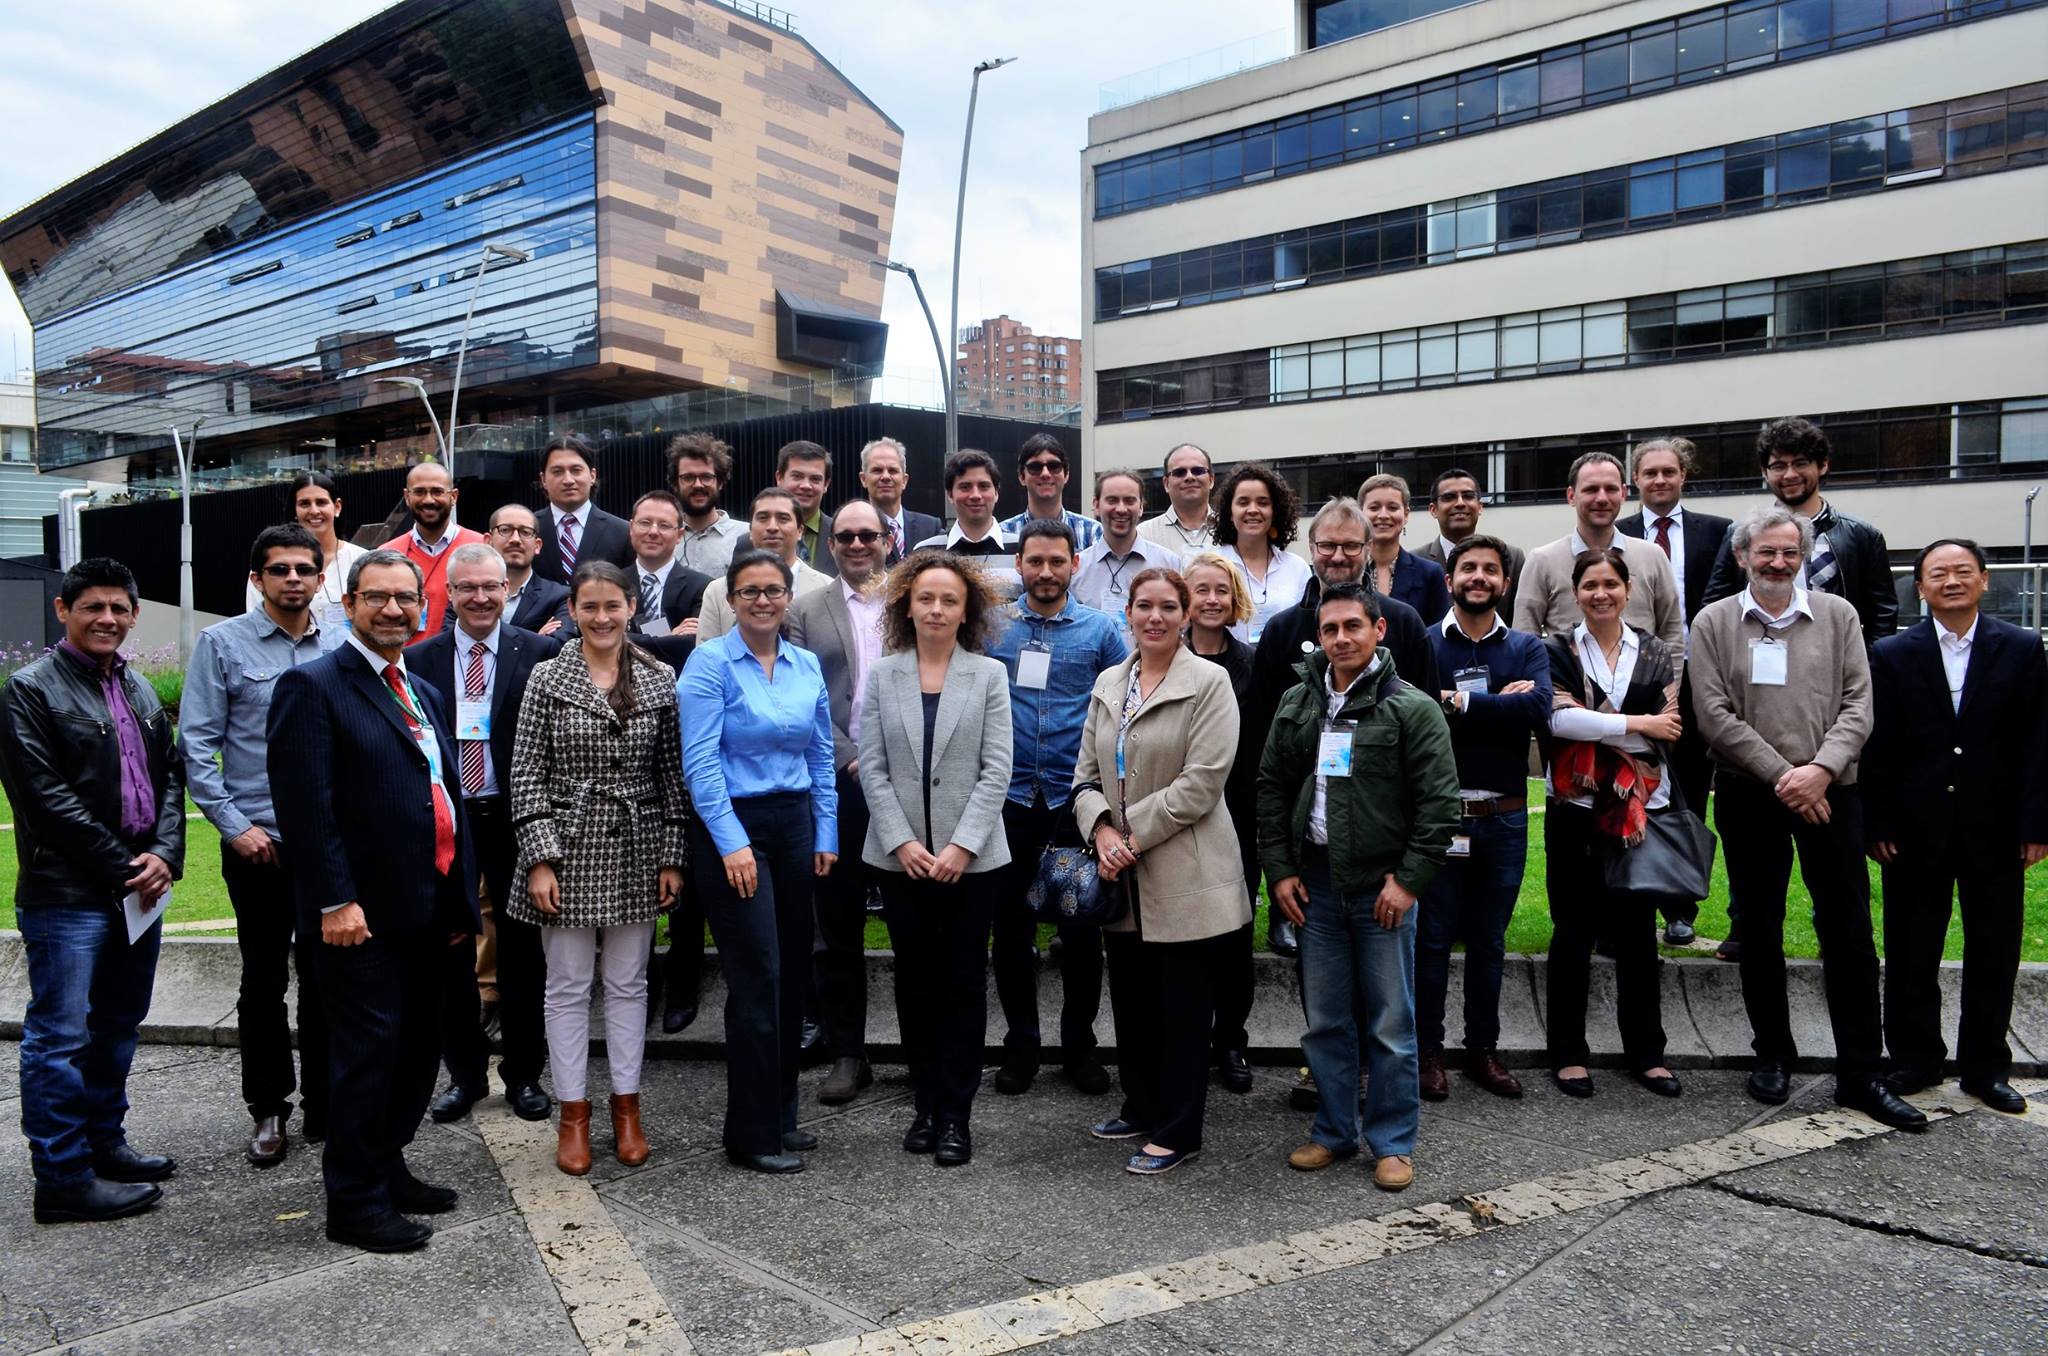 Researchers in the field of electrical engineering from Germany and Colombia attended the workshop